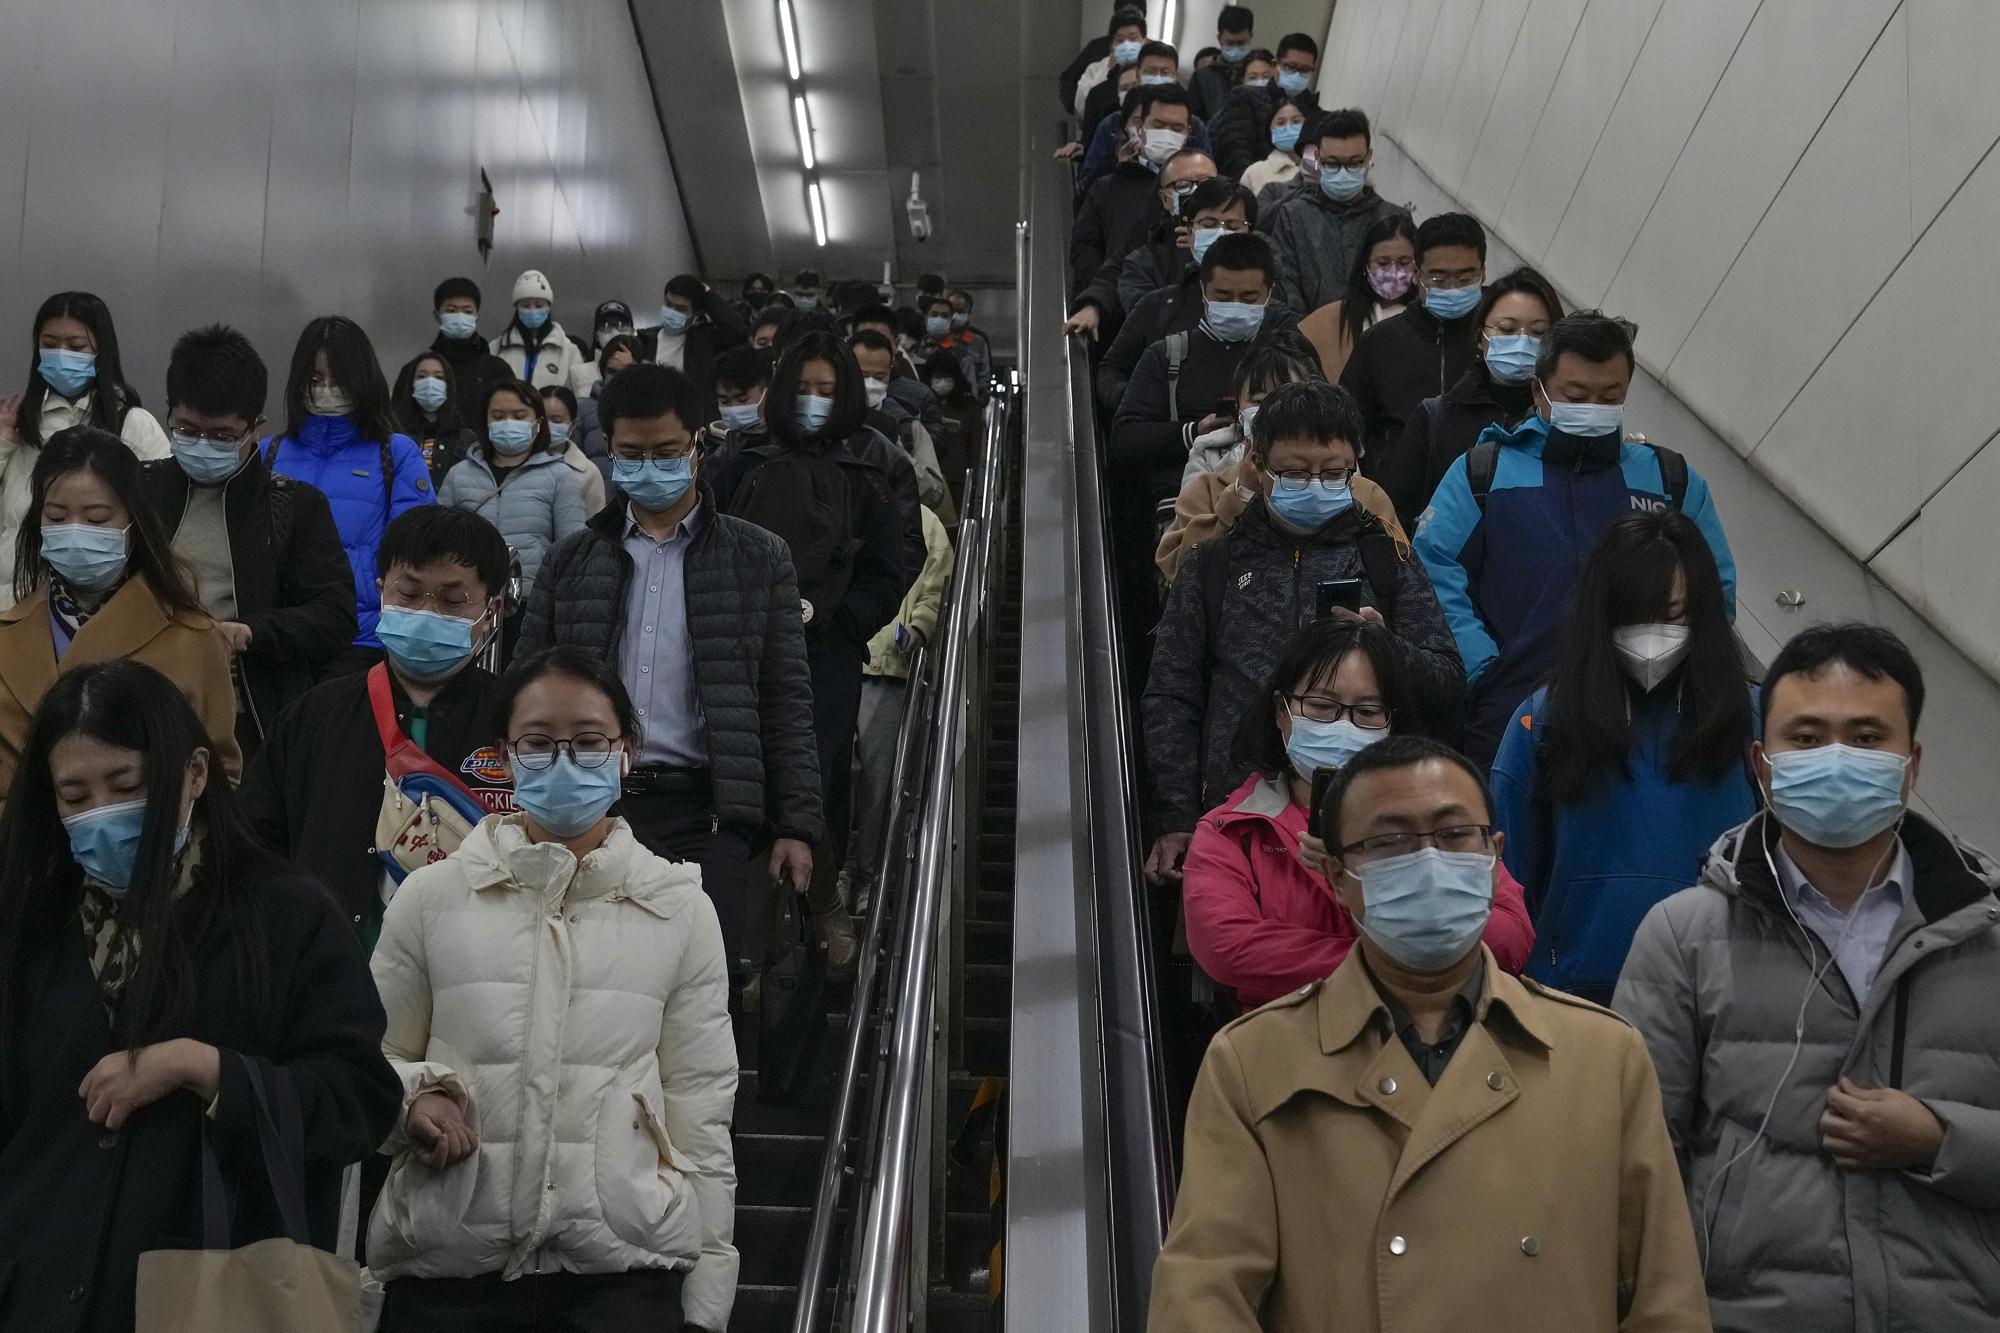 Commuters rush to catch their trains at a subway station during the morning rush hour in Beijing on Monday, Nov. 14, 2022. The world's population is projected to hit an estimated 8 billion people on Tuesday, Nov. 15, according to a United Nations projection. (AP Photo/Andy Wong)